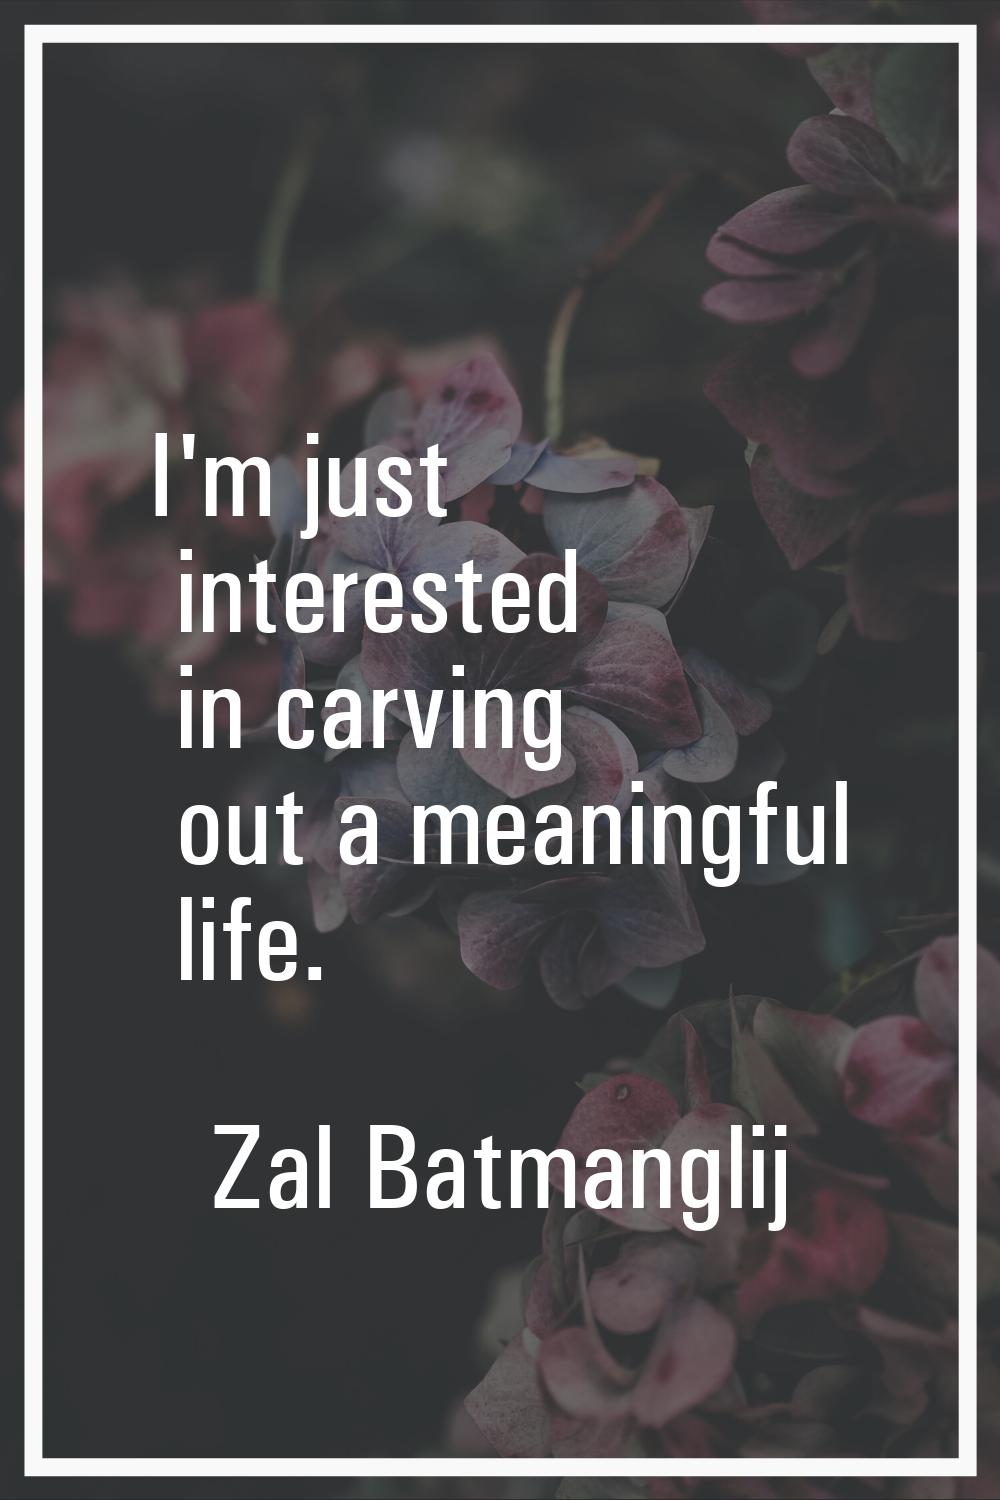 I'm just interested in carving out a meaningful life.